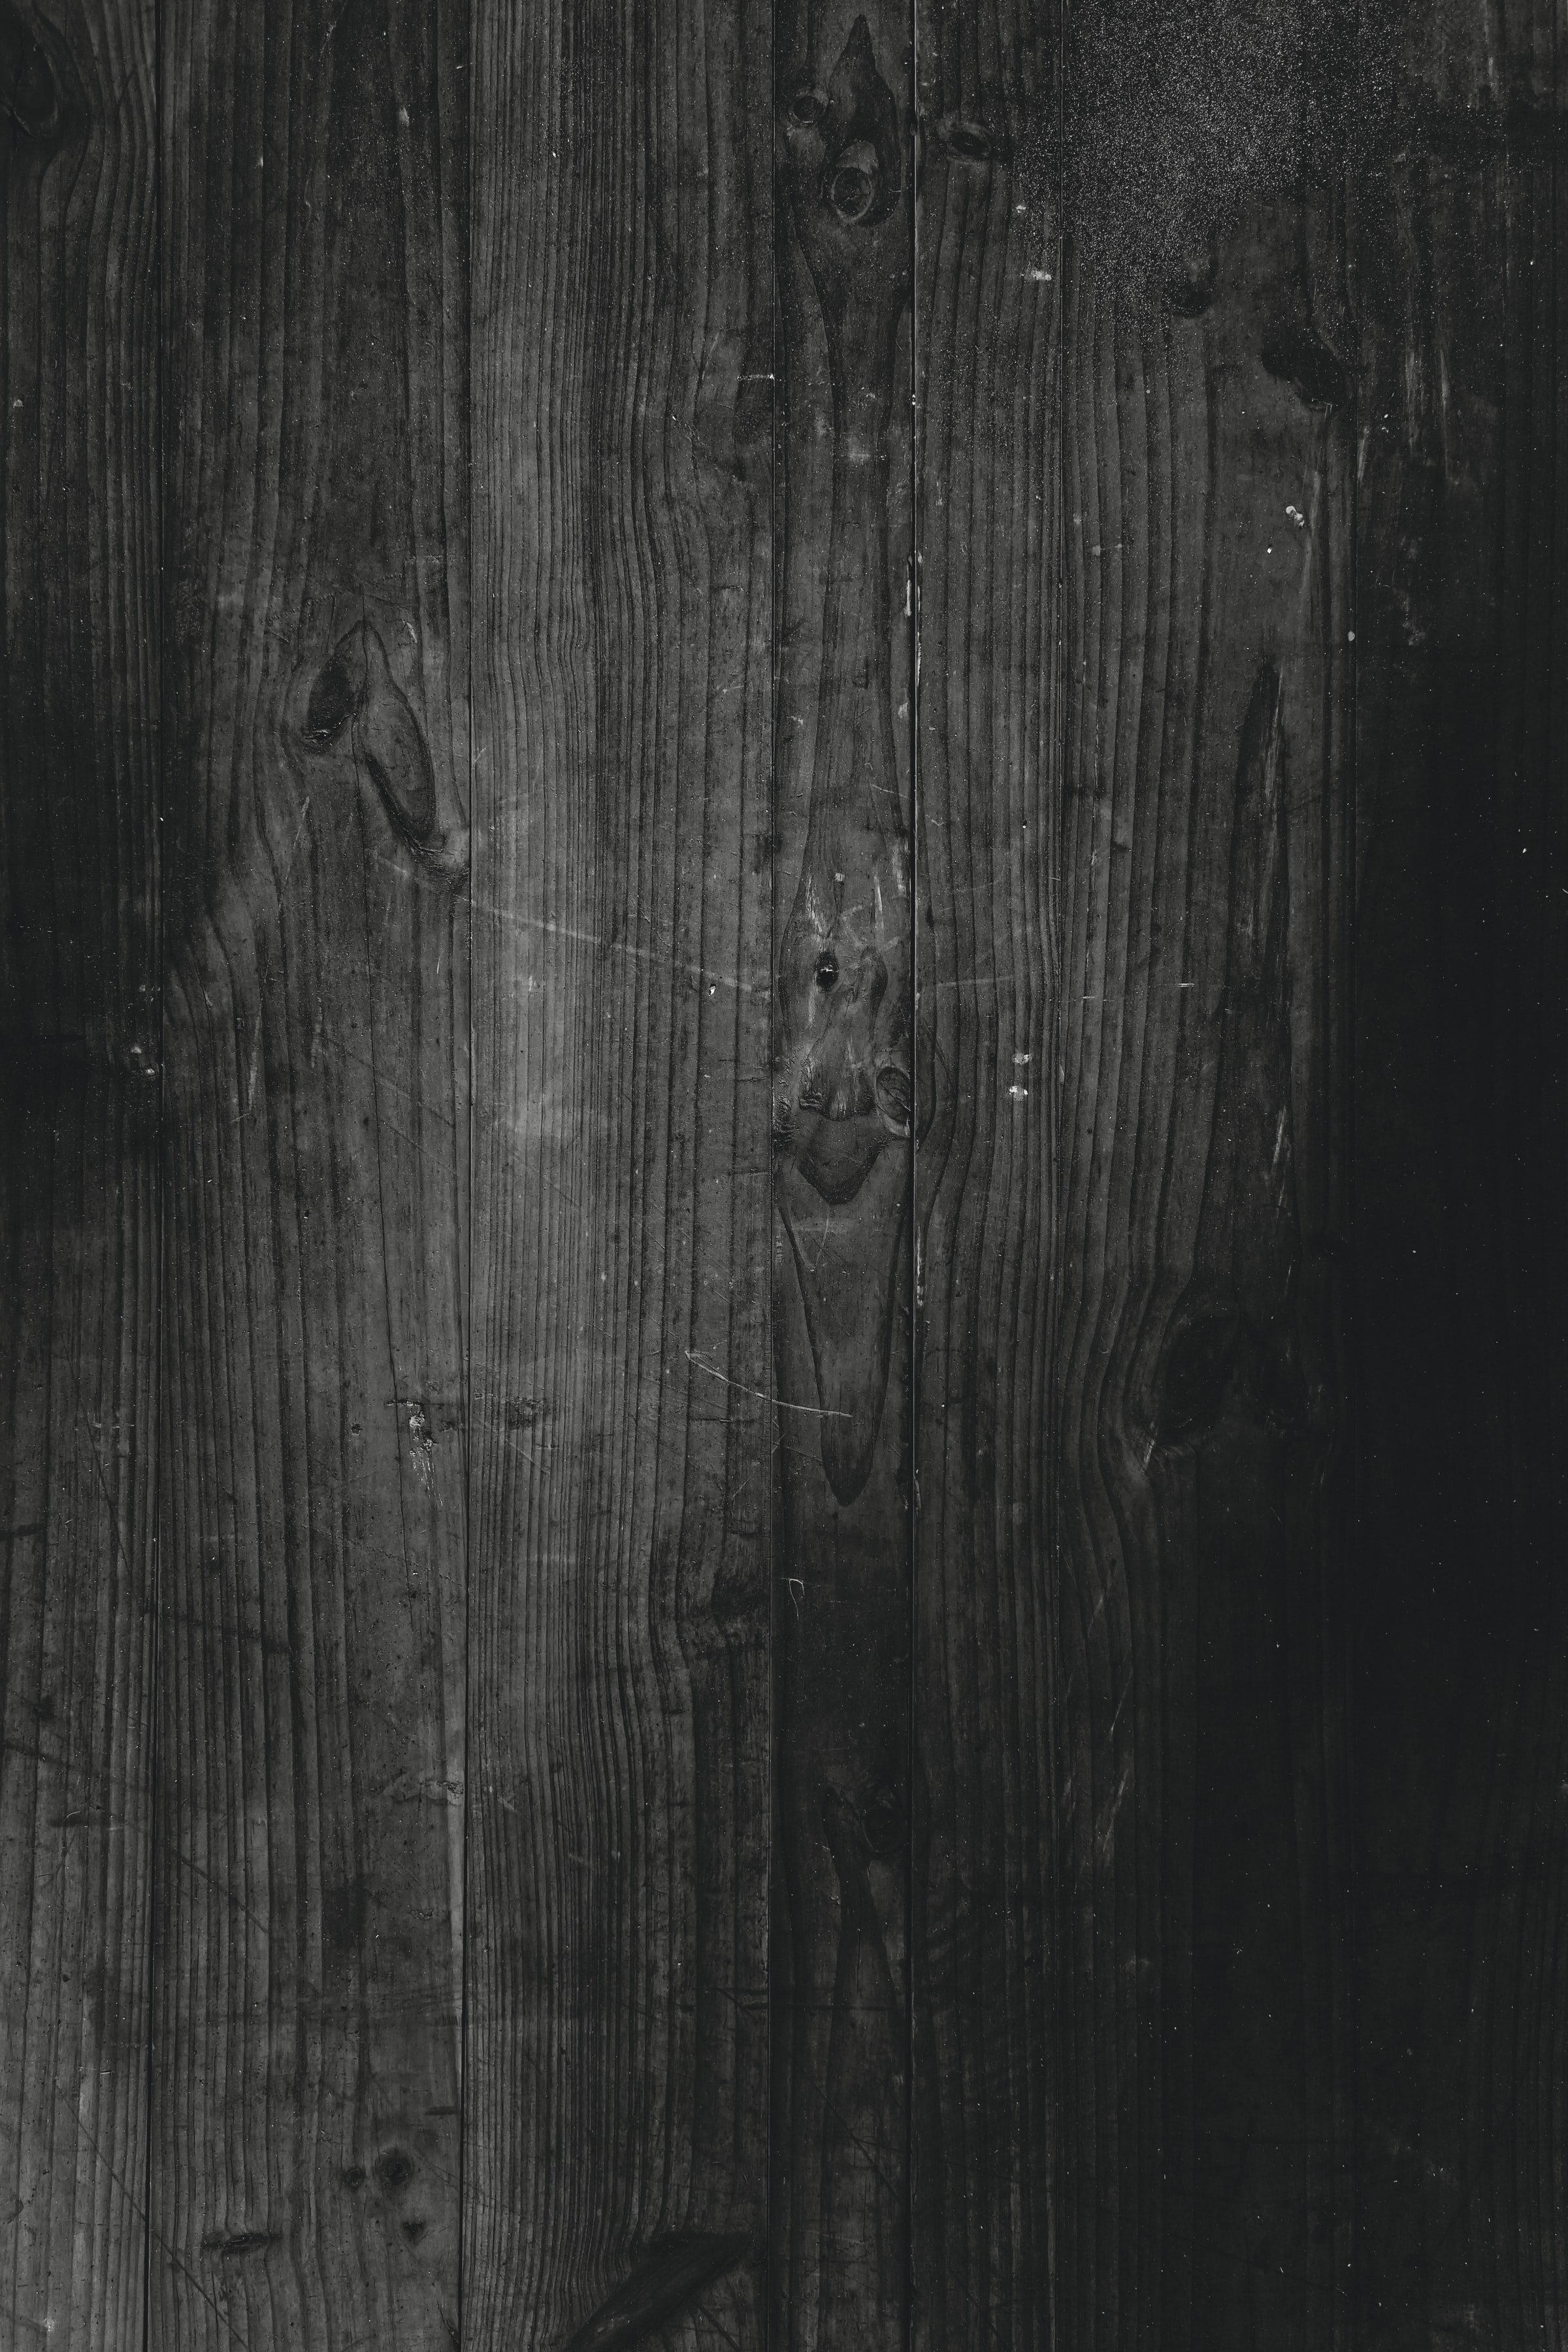 texture, wood, textures, wooden, bw, chb, planks, board